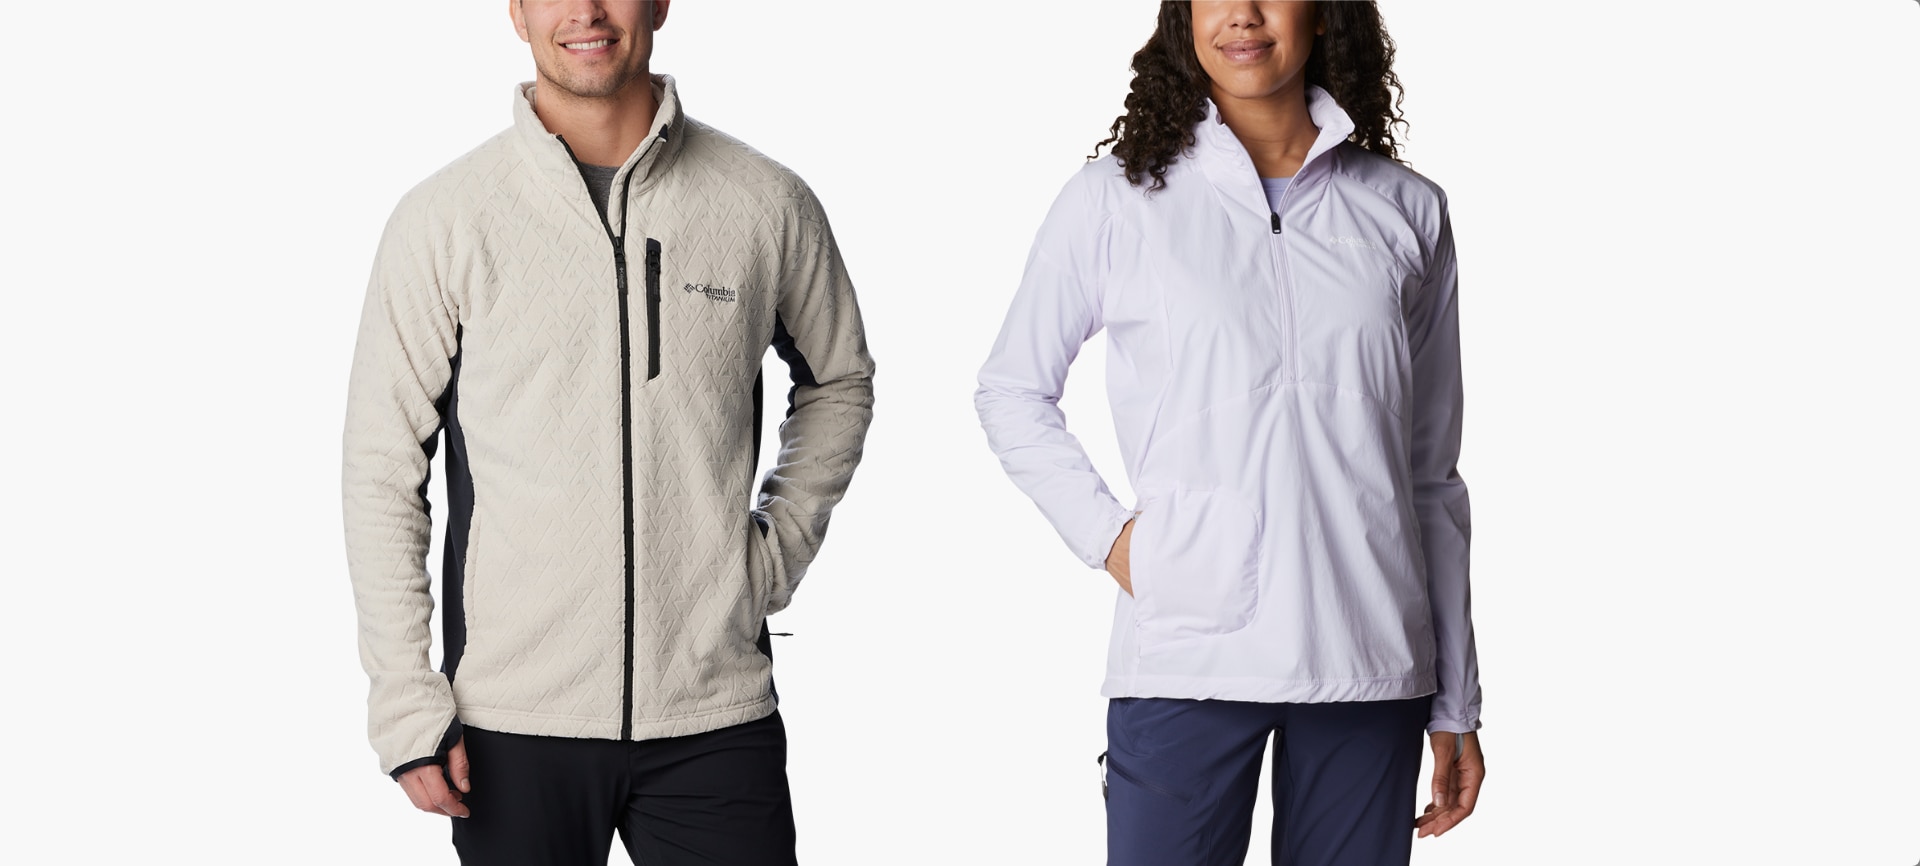 Columbia Clothing & Outerwear 25% off*